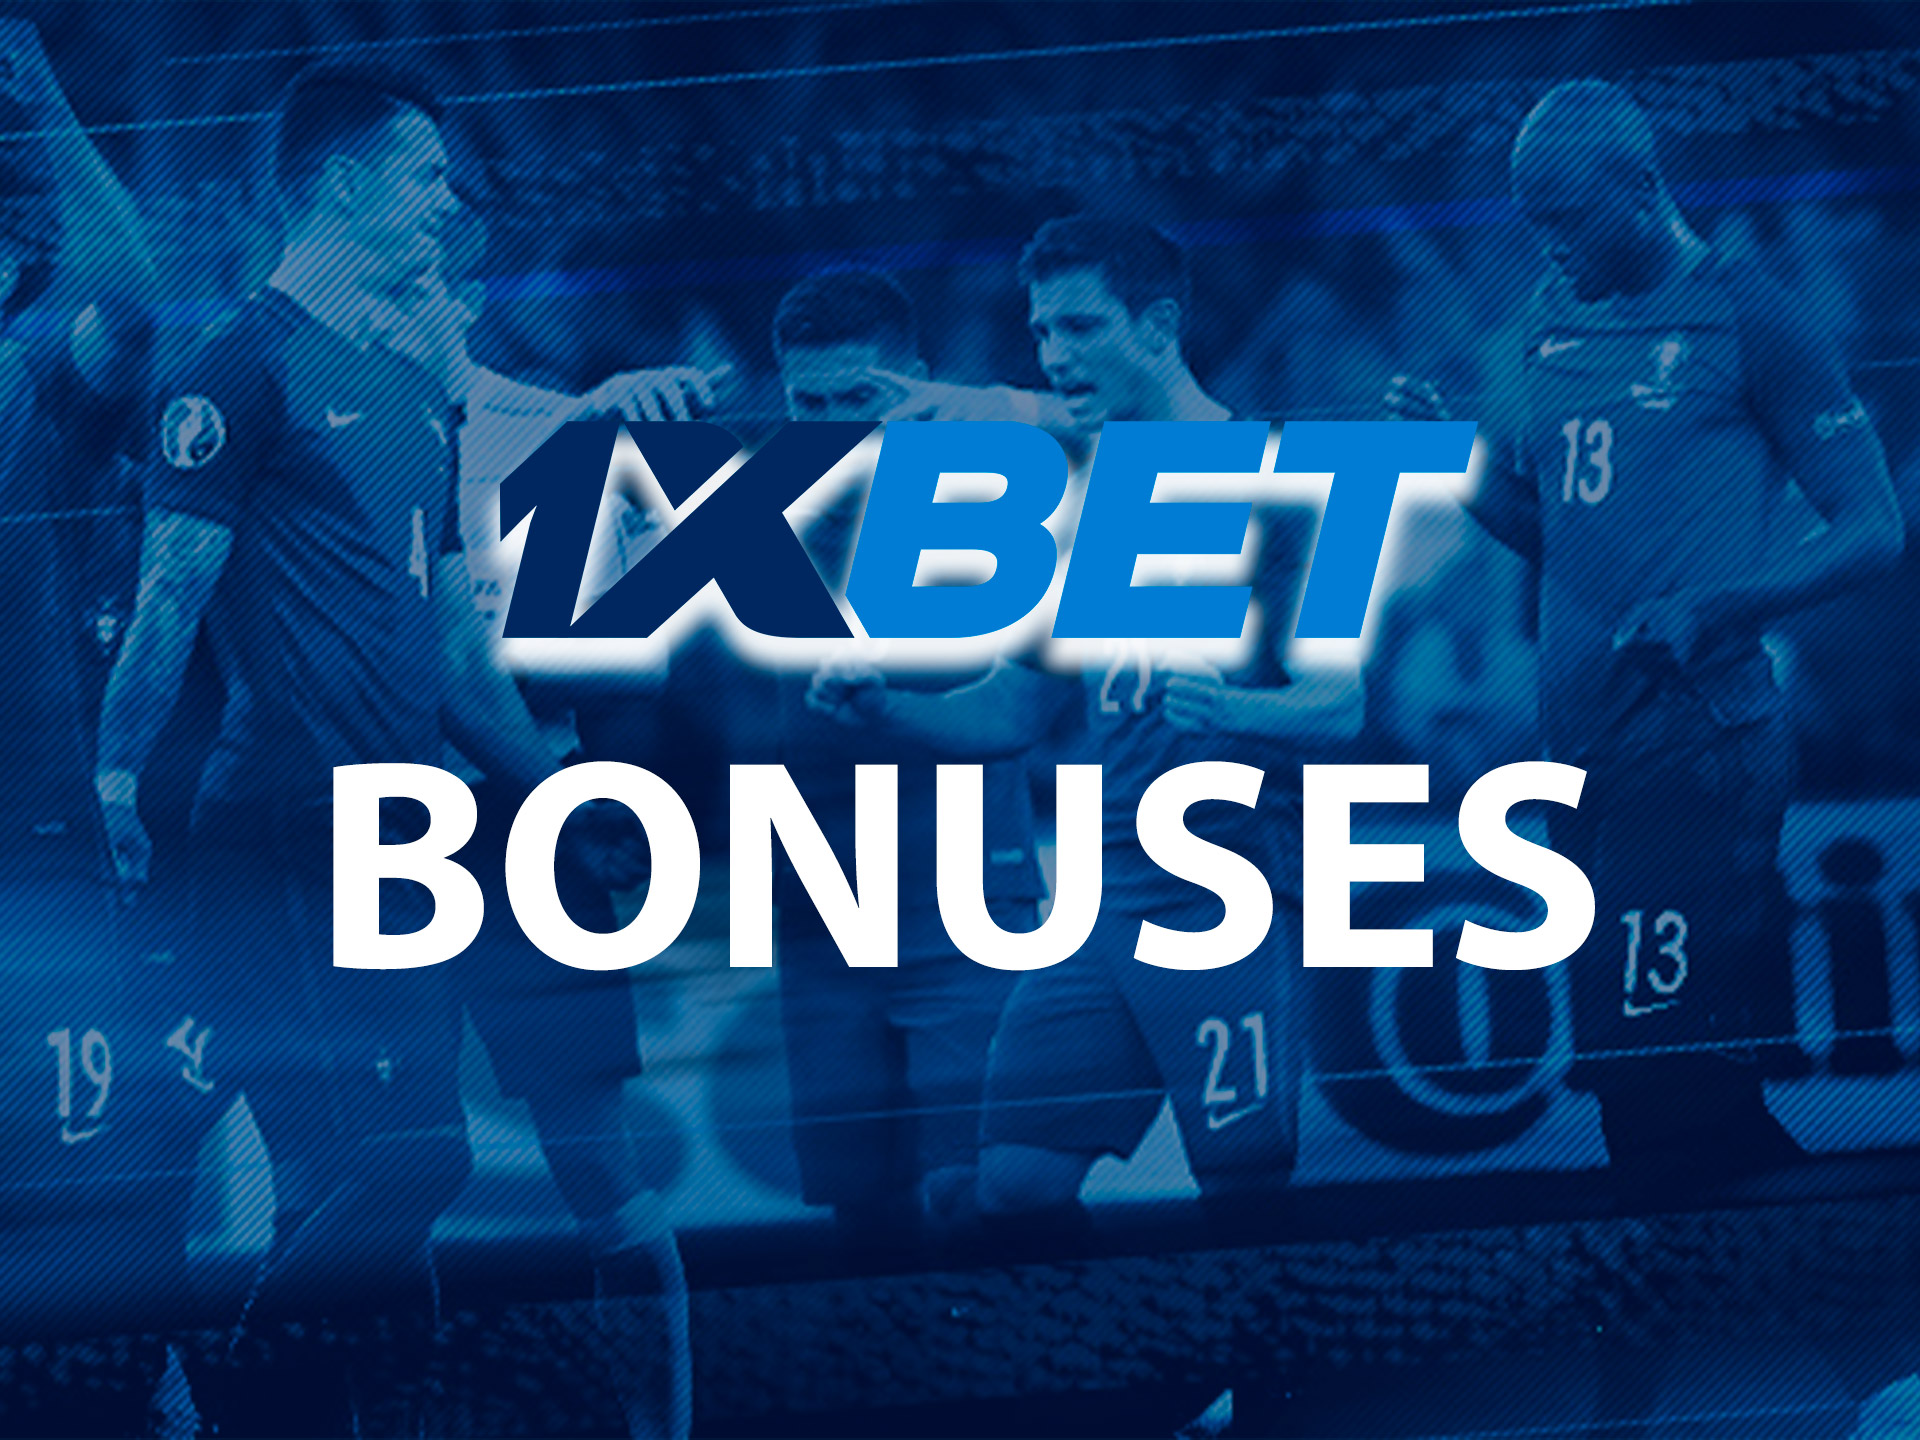 Register at 1xbet and take part in promo events and receive bonuses.